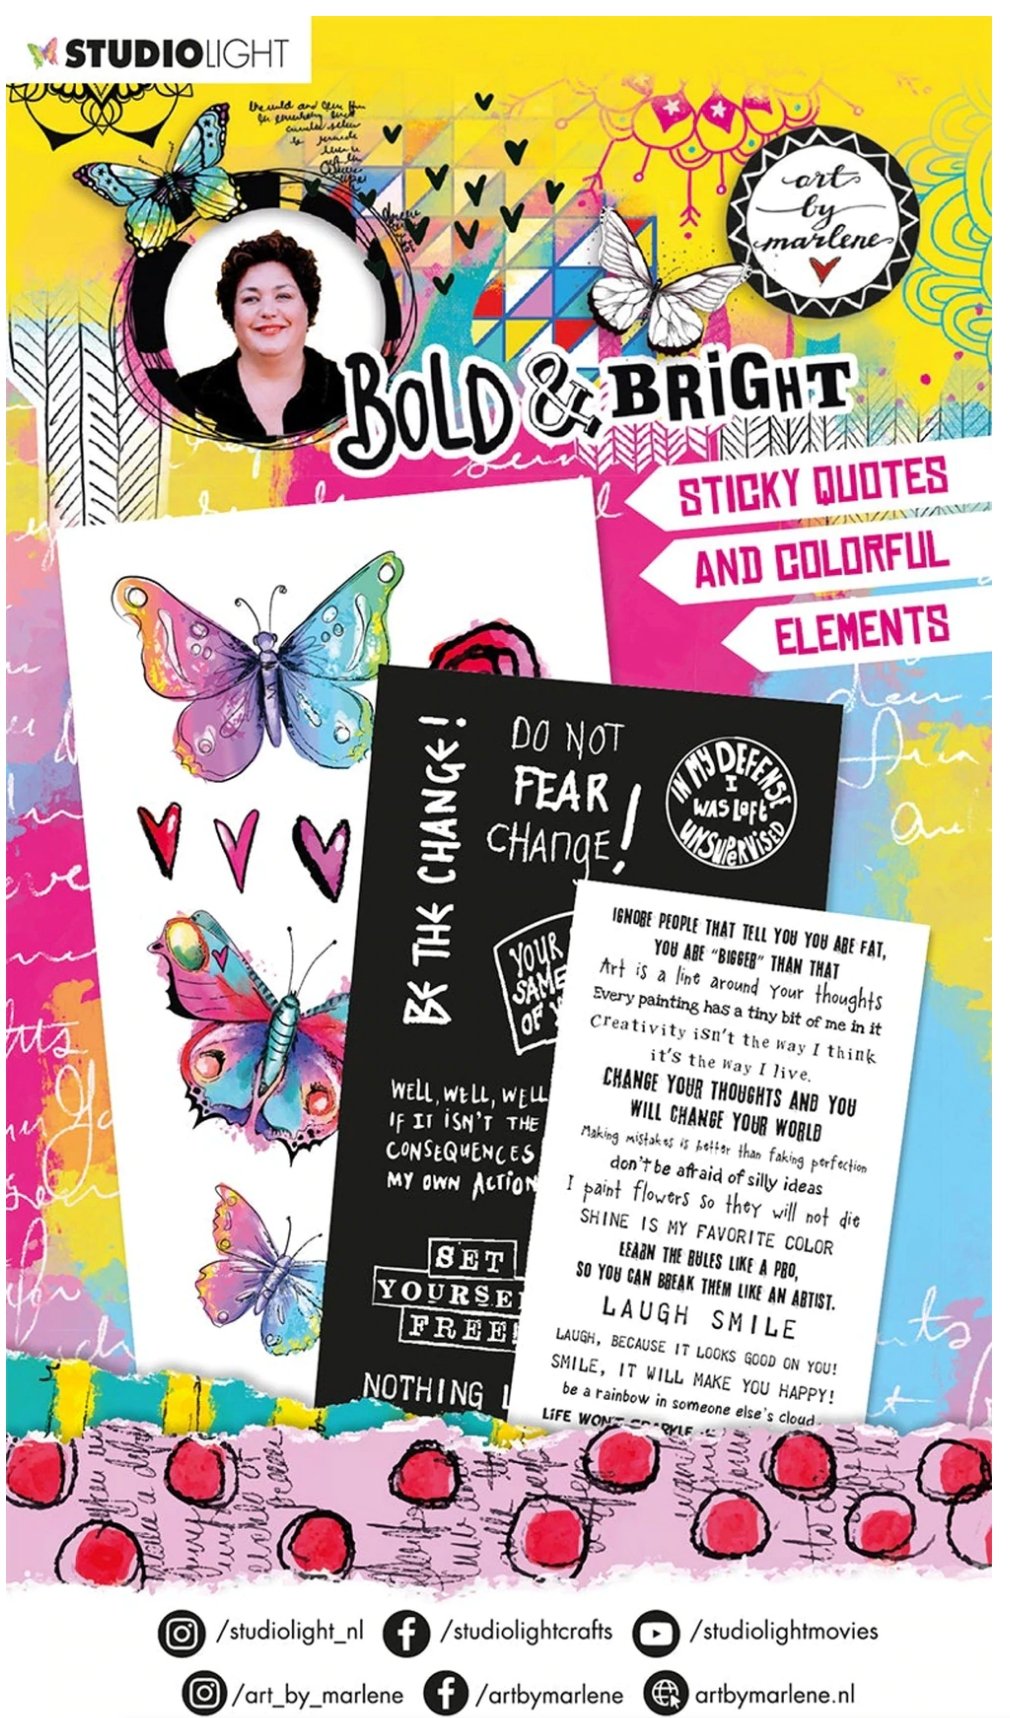 Studio Light - Art By Marlene Sticker Pad Sticky Quotes And Colorful Elements Bold & Bright 120x210x5mm 1 PC Nr.04 Studiolight